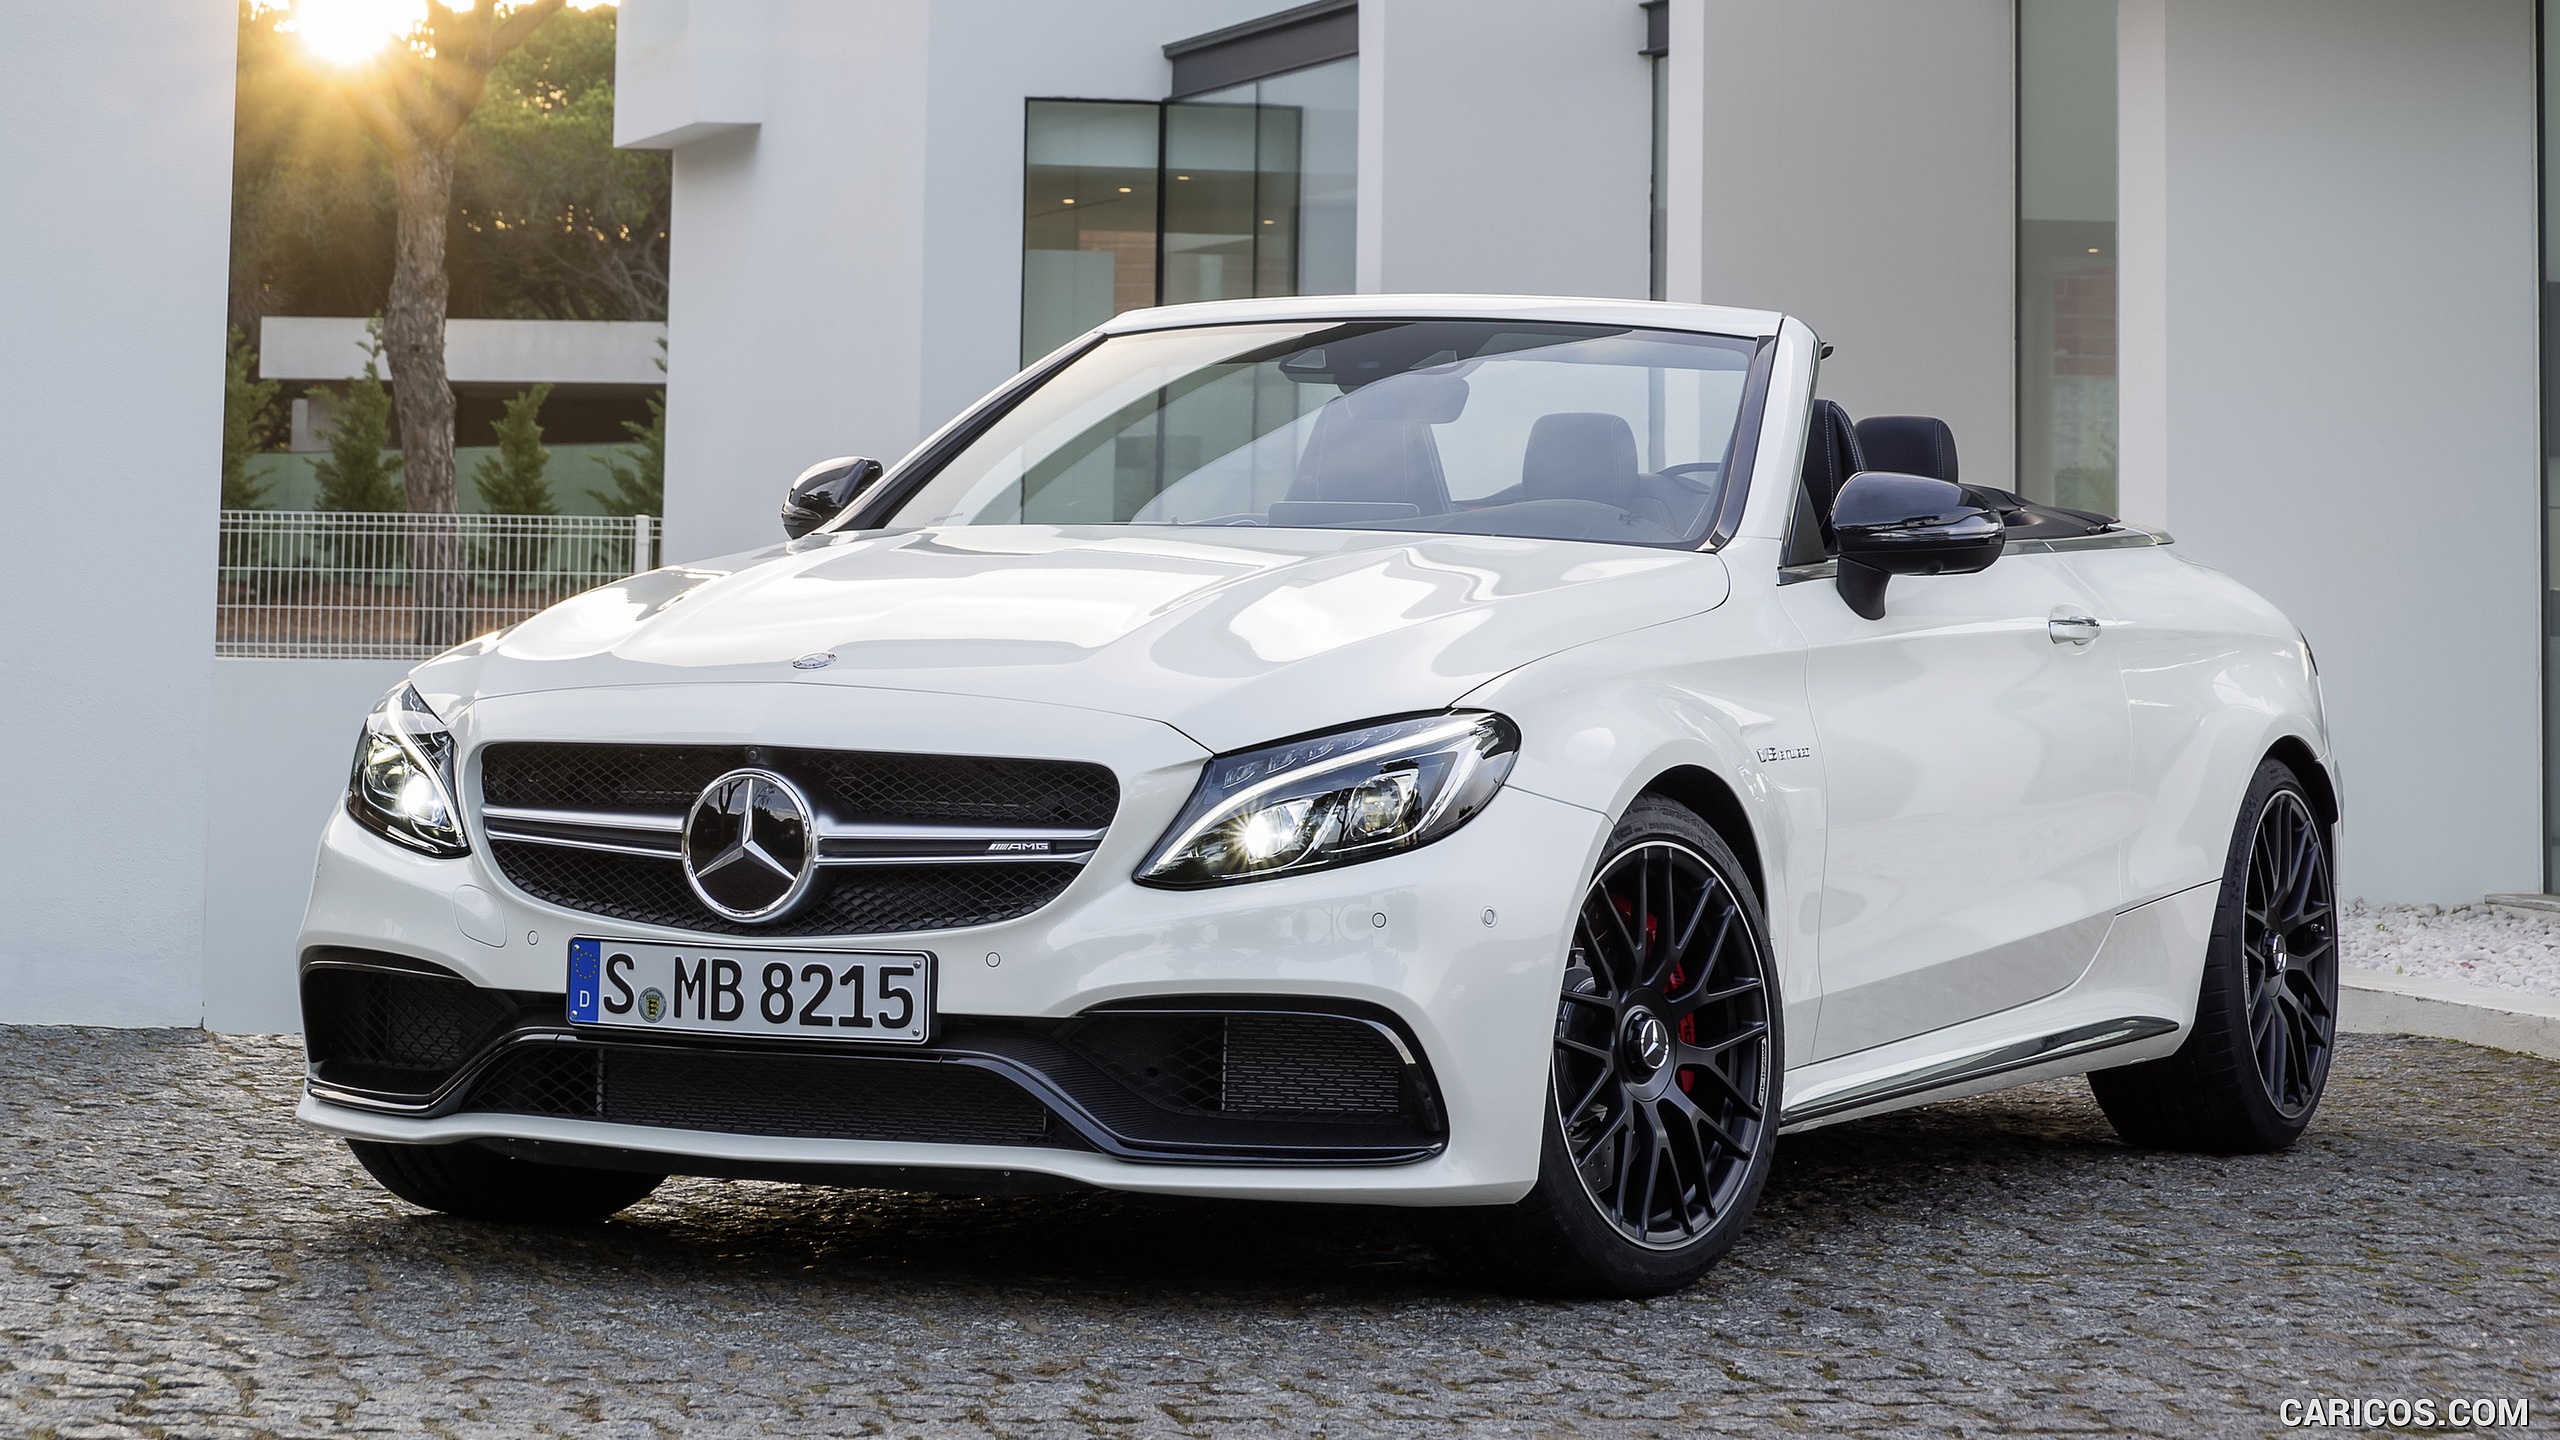 2017 Mercedes-AMG C63 S Cabriolet (Chassis: A205, Color: Designo Diamond White Bright) - Front, #15 of 222